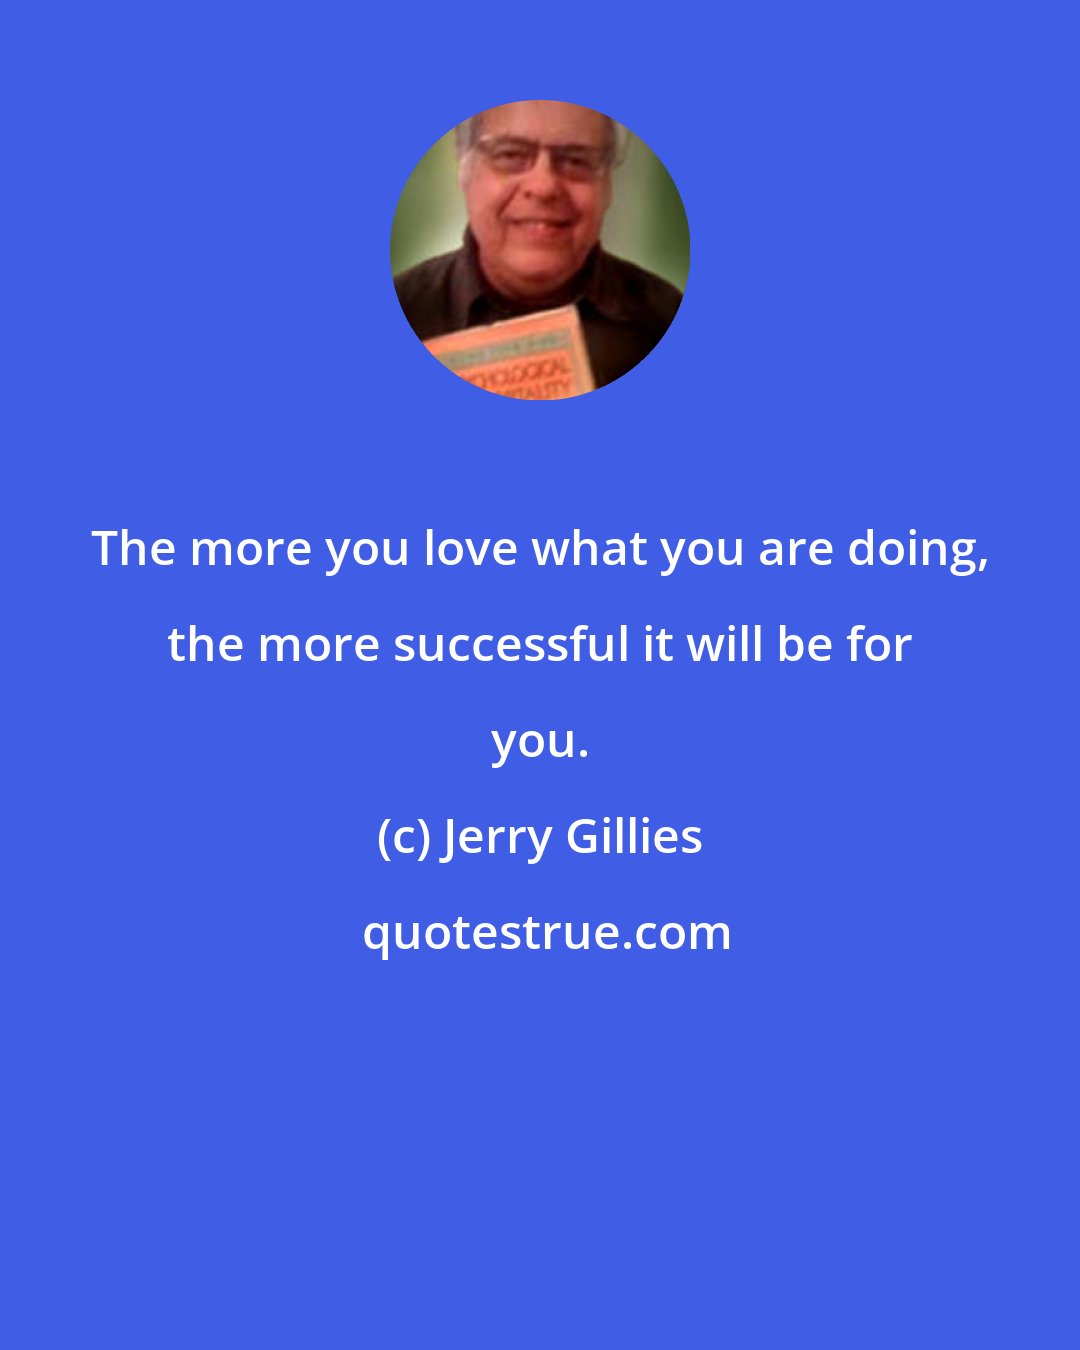 Jerry Gillies: The more you love what you are doing, the more successful it will be for you.